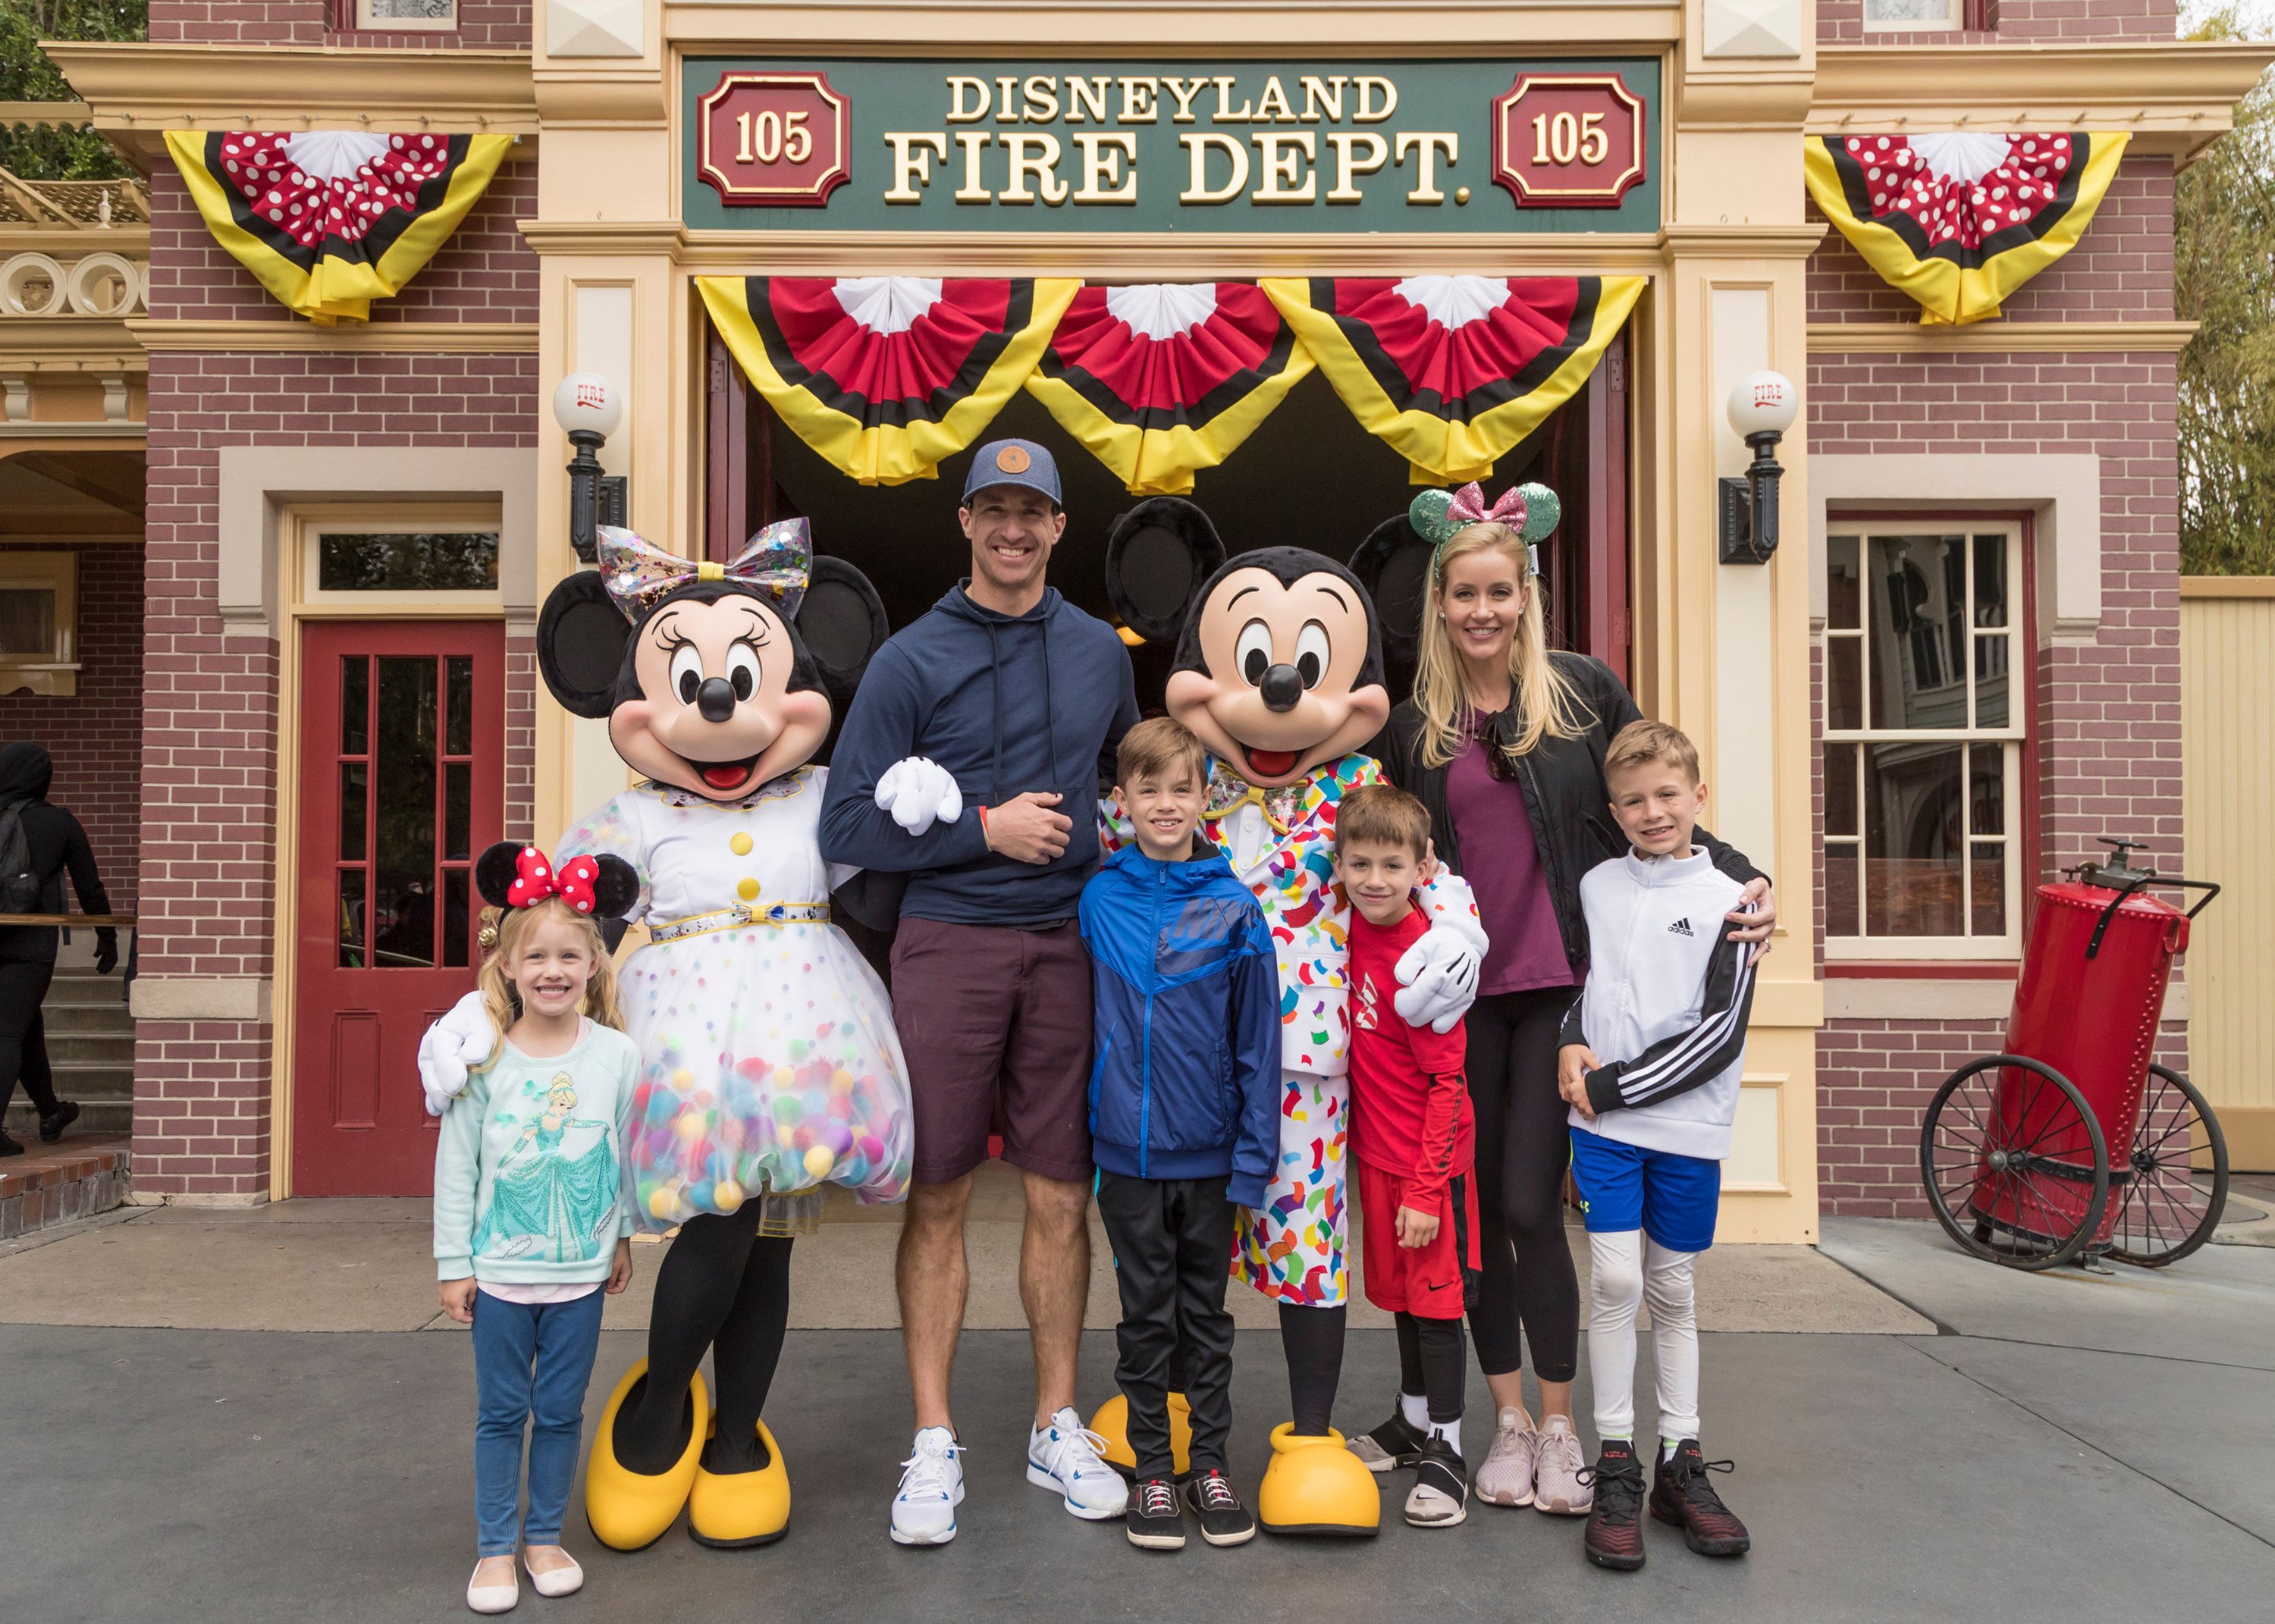 Drew Brees, Brittany Brees, and their four children (l-r) Rylen, 5, Bowen, 9, Callen, 7, and Baylen, 10, pose with Mickey Mouse and Minnie Mouse at Disneyland Park on March 11, 2019, in Anaheim, California. | Source: Getty Images